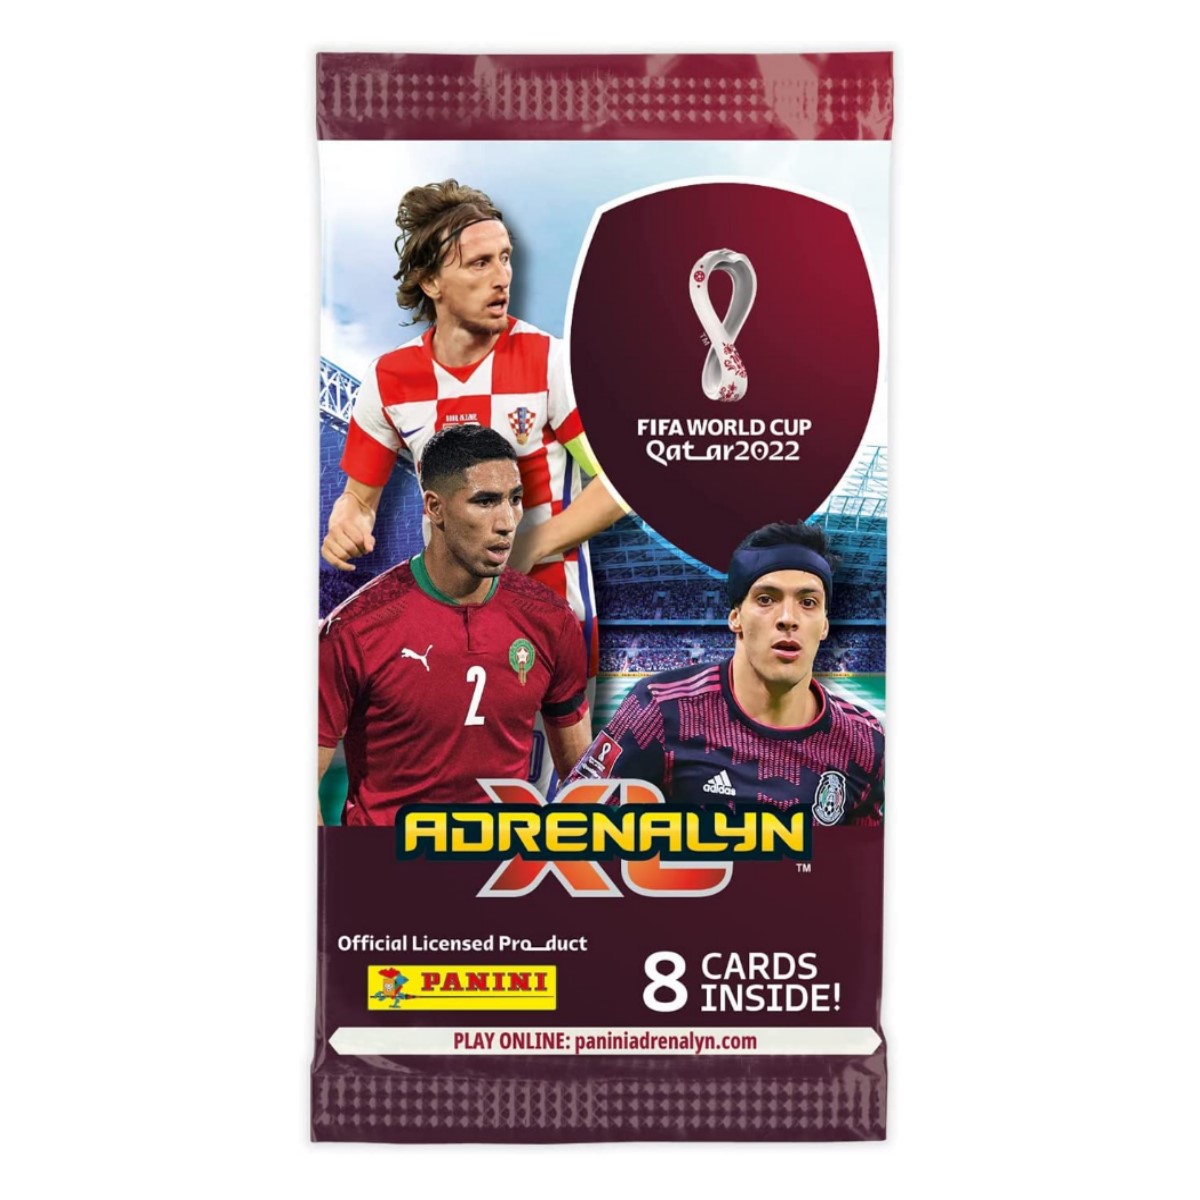 Panini | FIFA World Cup 2022 Adrenalyn XL Trading Card Packs | New Sealed - Picture 1 of 7